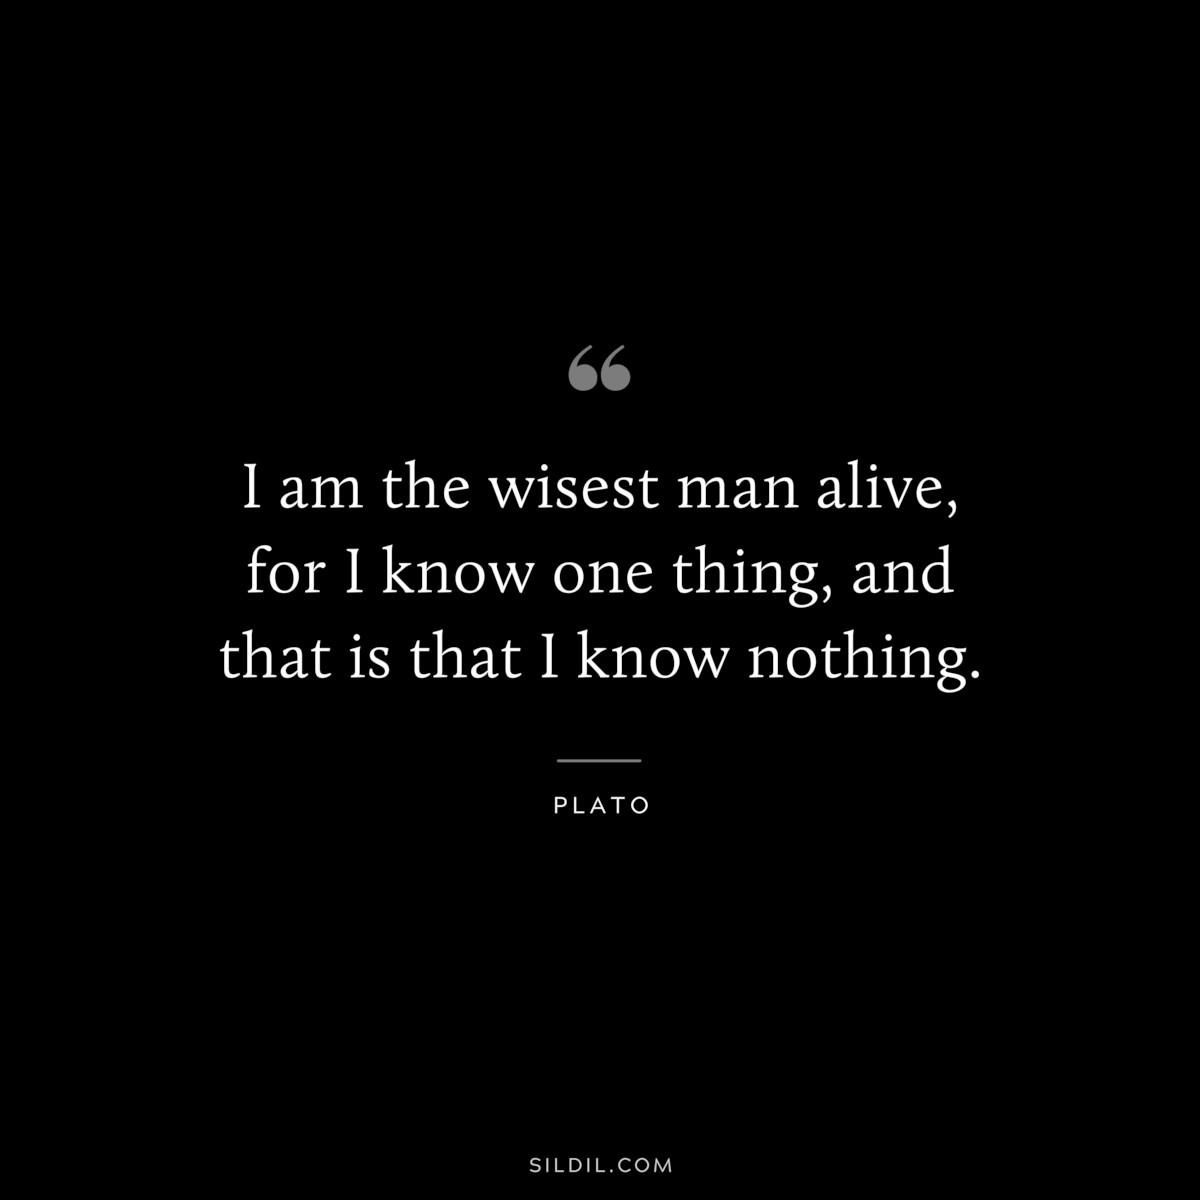 I am the wisest man alive, for I know one thing, and that is that I know nothing. ― Plato